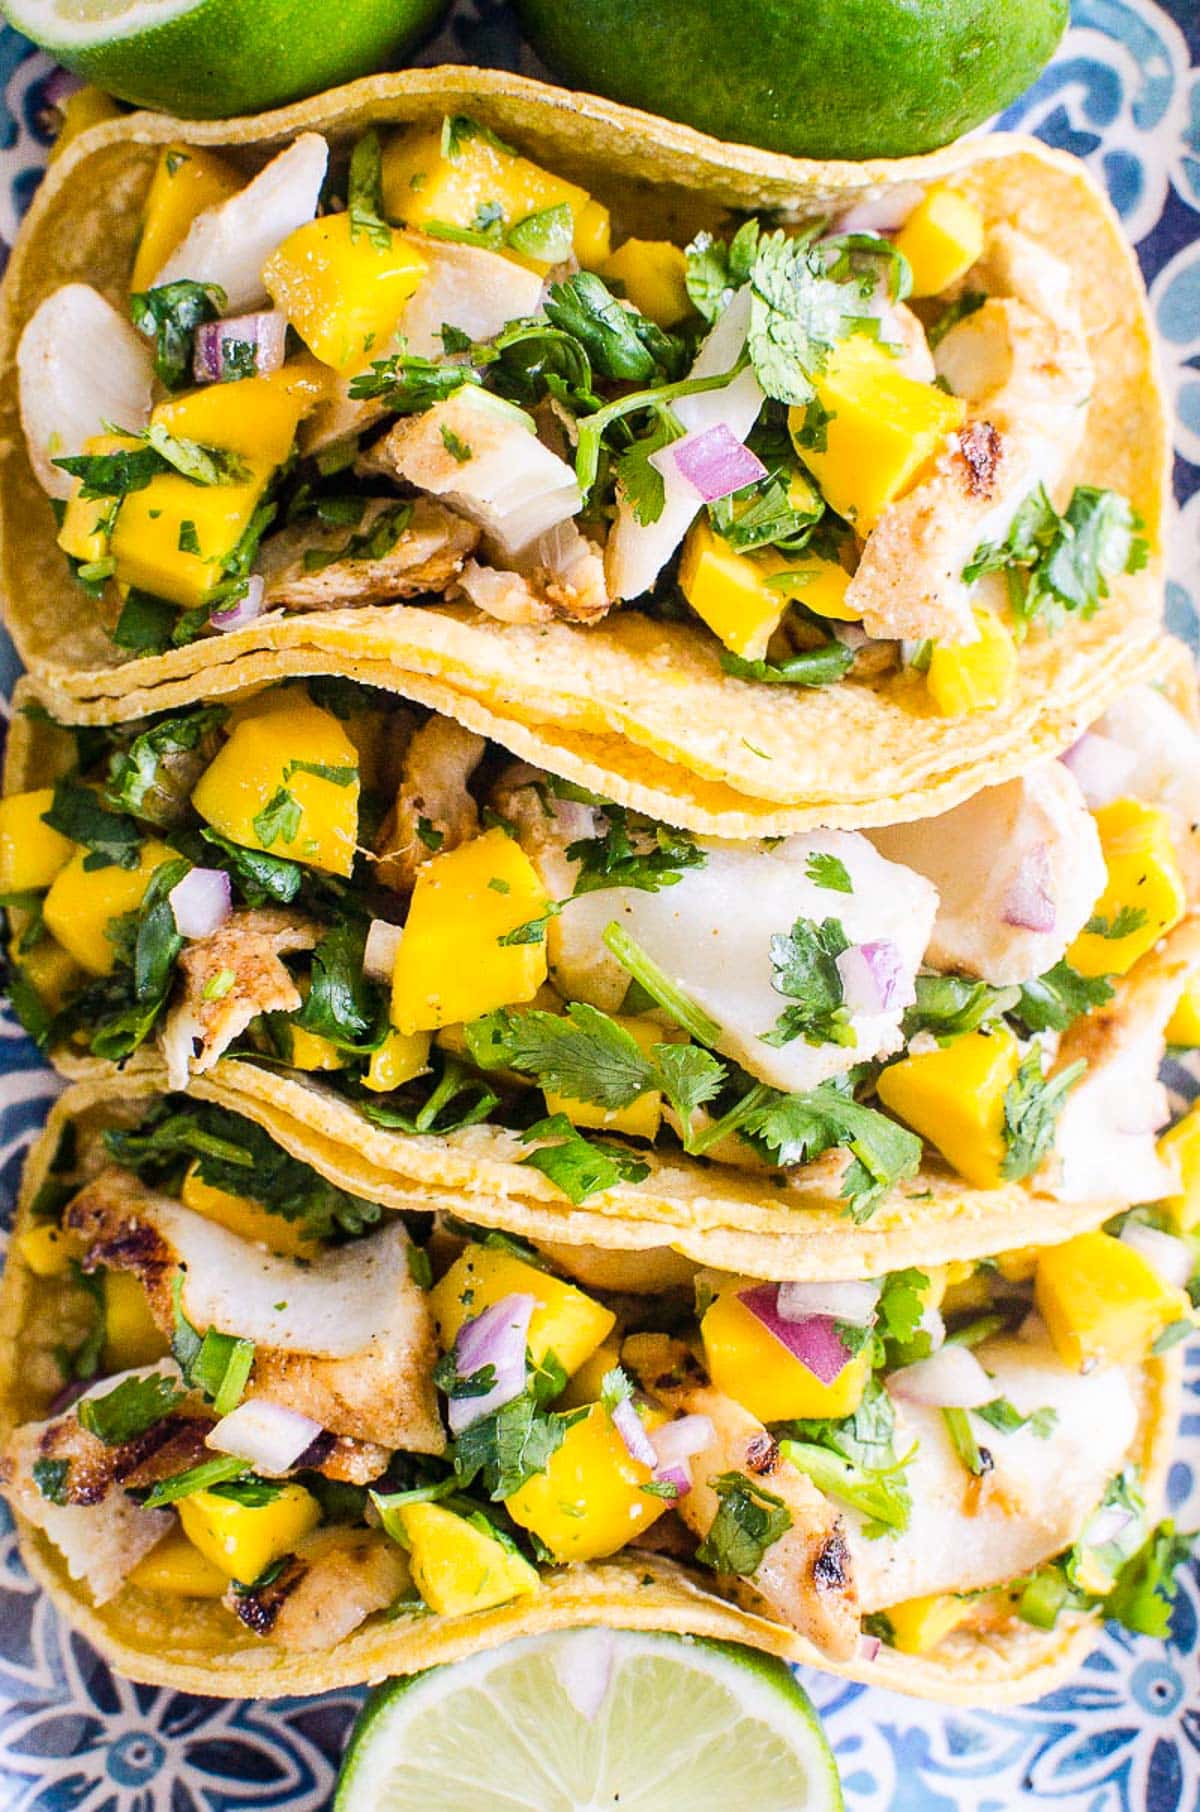 Grilled fish tacos with mango salsa and cilantro.